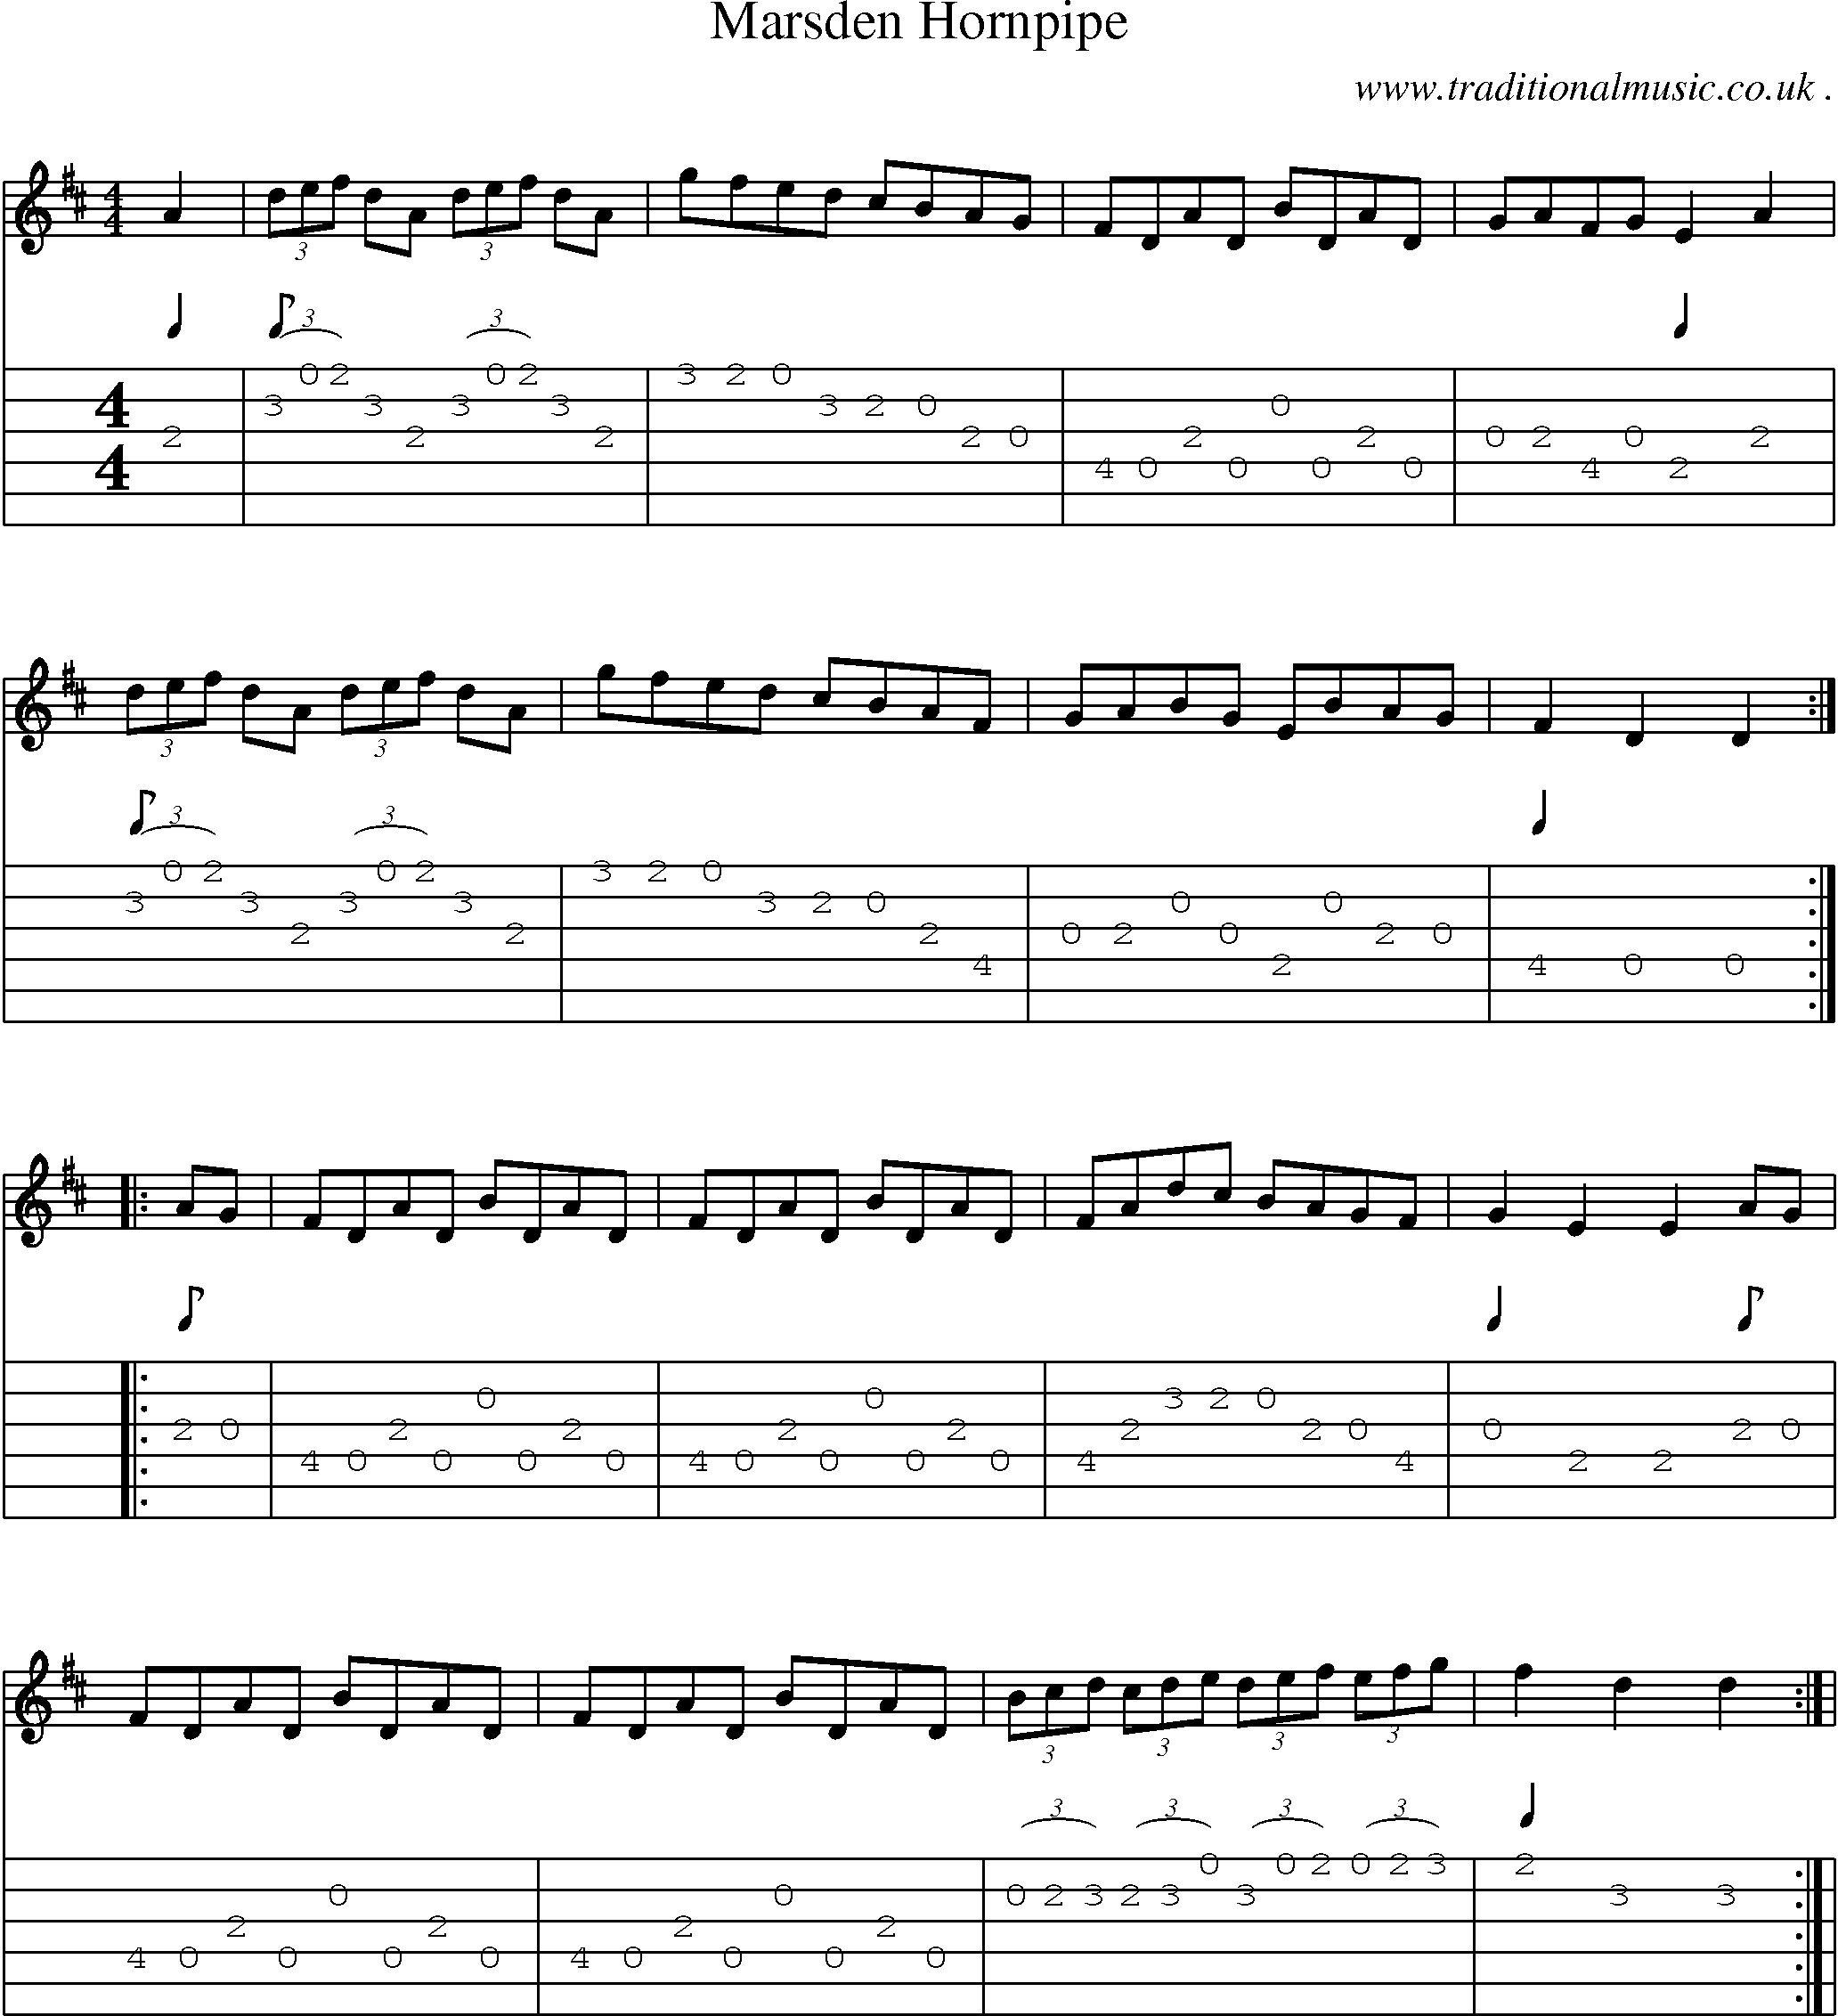 Sheet-Music and Guitar Tabs for Marsden Hornpipe